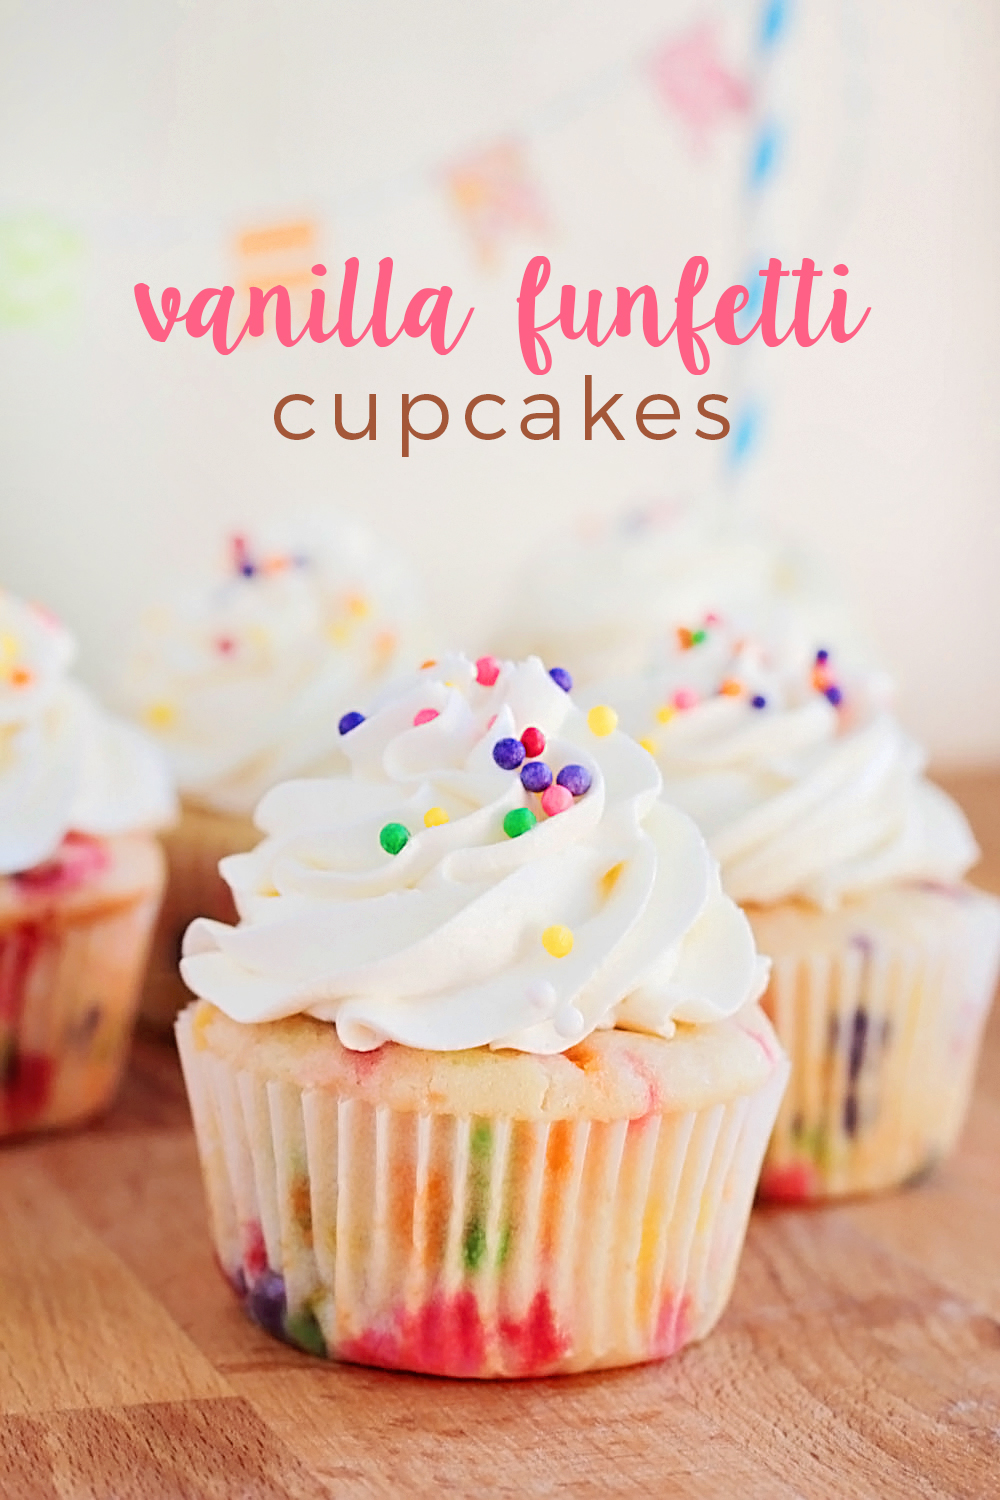 These cute and colorful vanilla funfetti cupcakes are so easy to make and better than the boxed mix! Perfect for birthdays and celebrations!